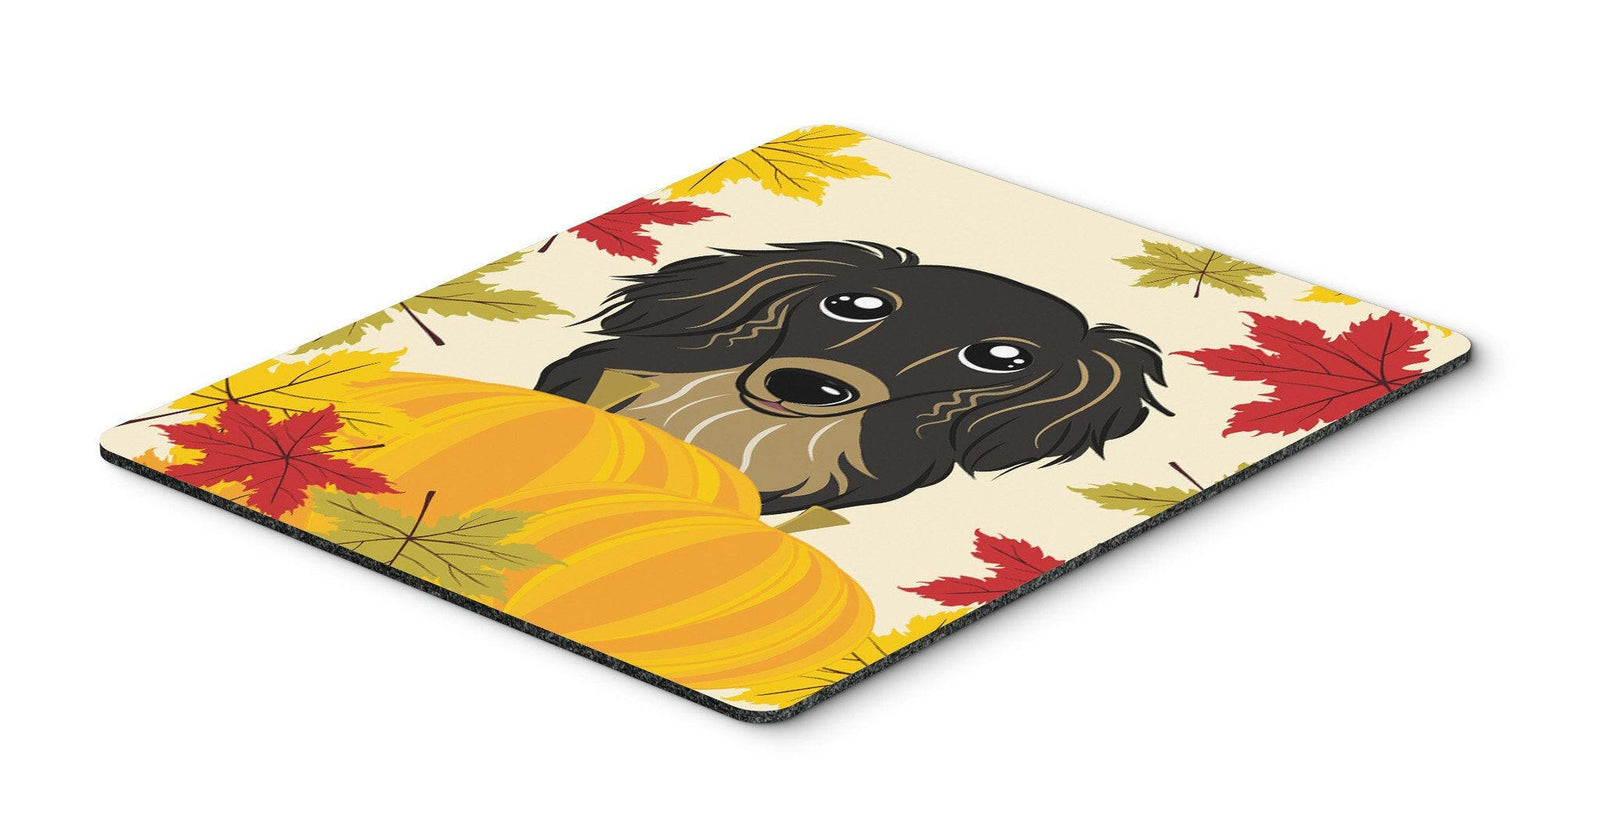 Longhair Black and Tan Dachshund Thanksgiving Mouse Pad, Hot Pad or Trivet BB2019MP by Caroline's Treasures